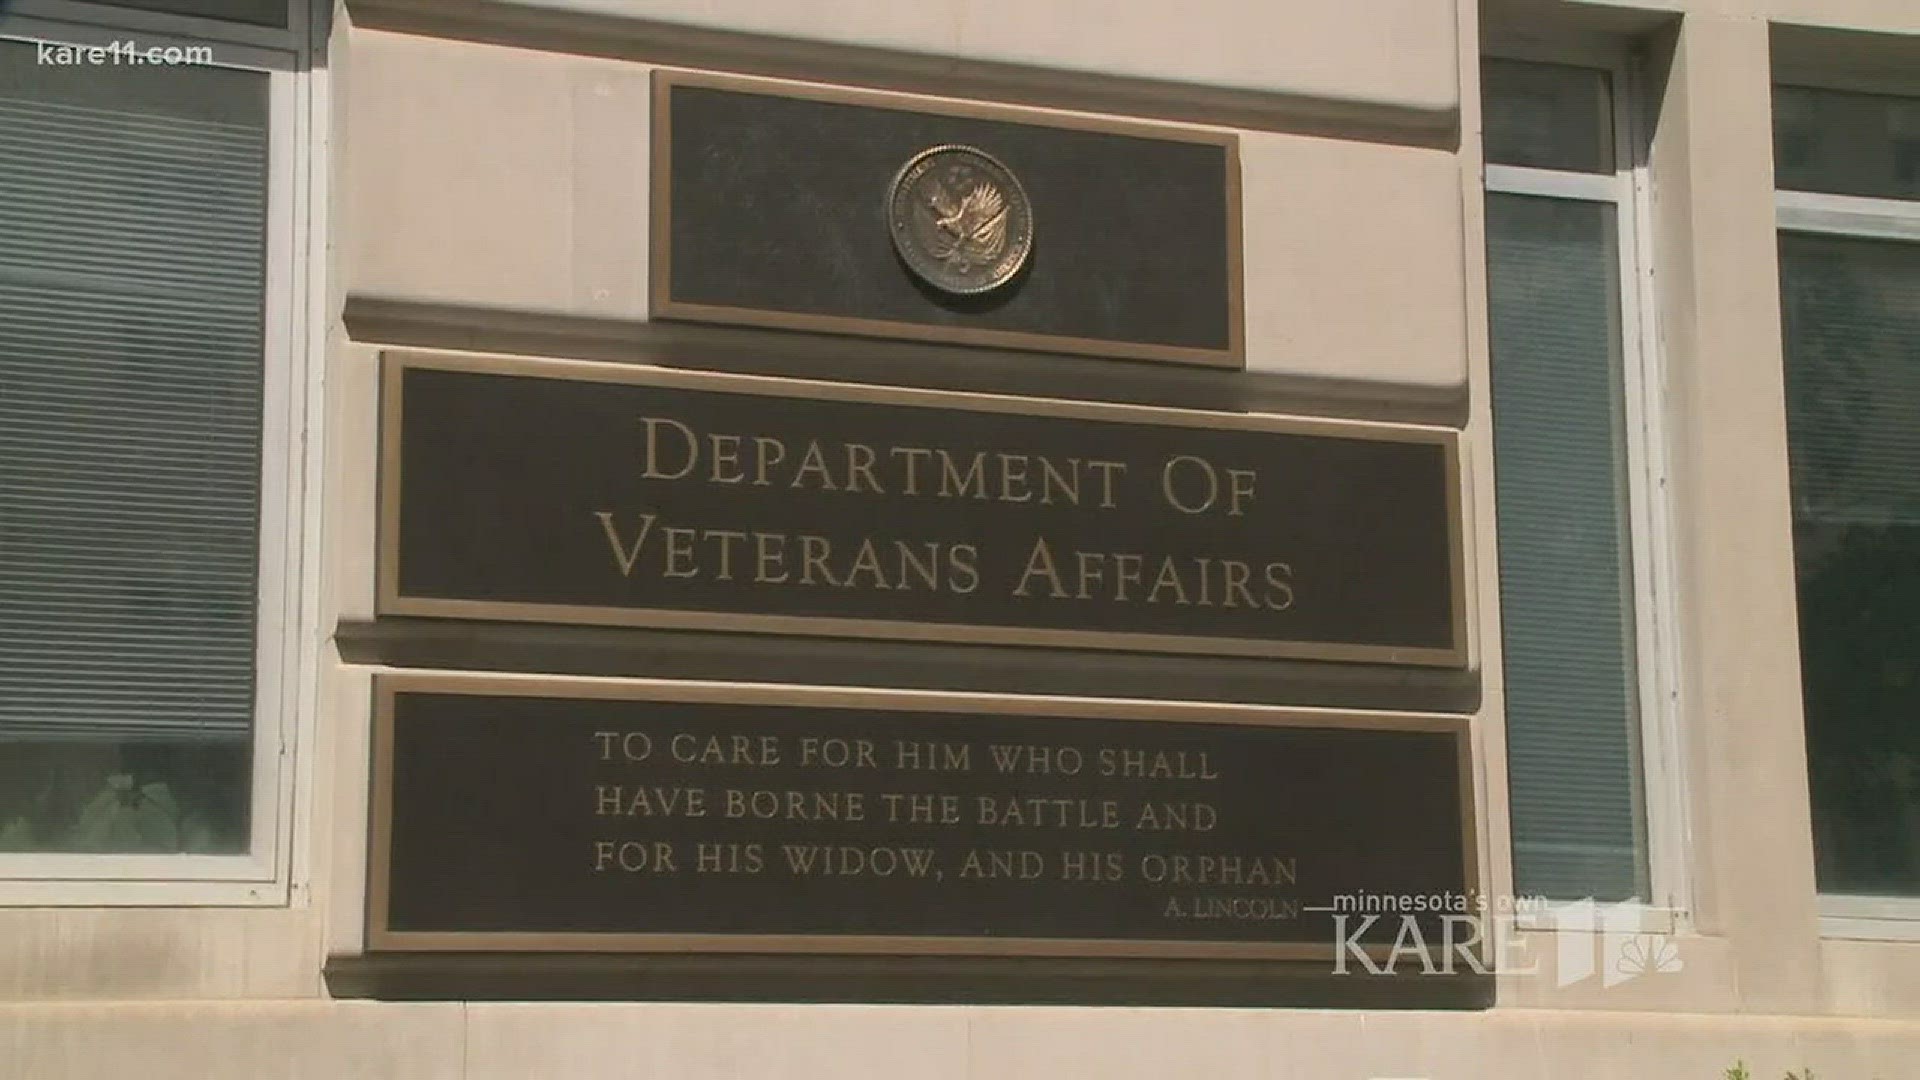 In the wake of a series of KARE 11 investigative reports exposing how the VA was wrongly sticking veterans with medical bills they should not owe, the VA Inspector General has launched a nationwide review. http://kare11.tv/2iLd8ZQ